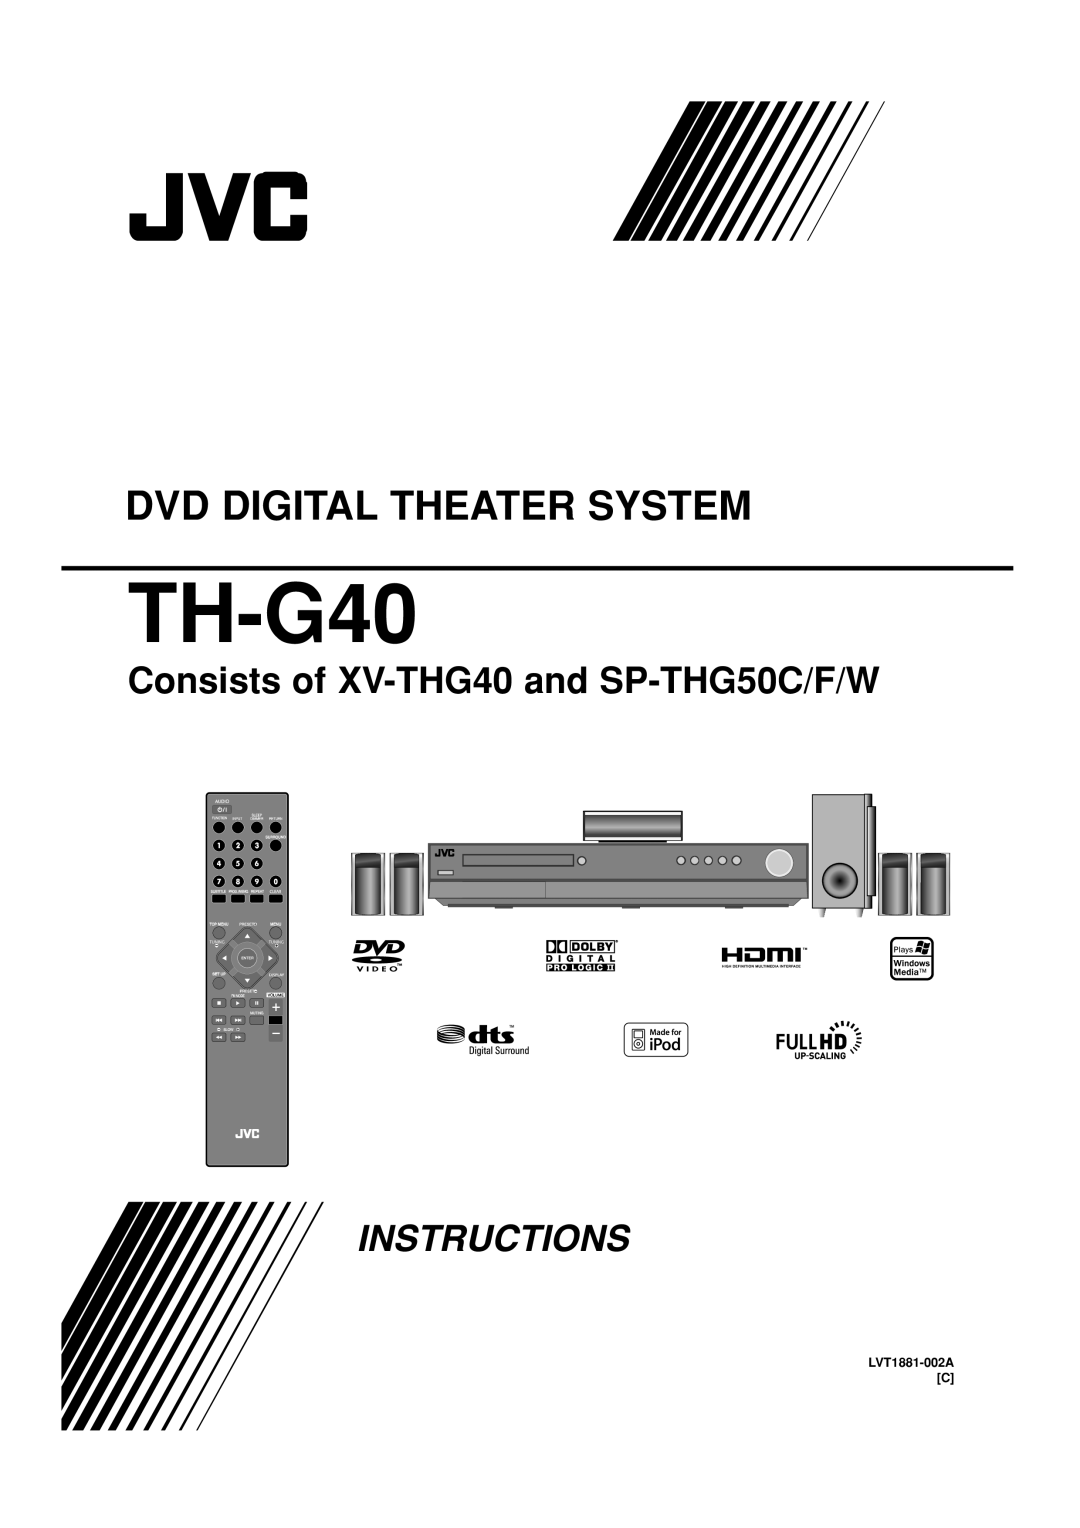 JVC TH-G40 Dvd Digital Theater System, Consists of XV-THG40 and SP-THG50C/F/W, Instructions, LVT1881-002A C, Tuningtuning 